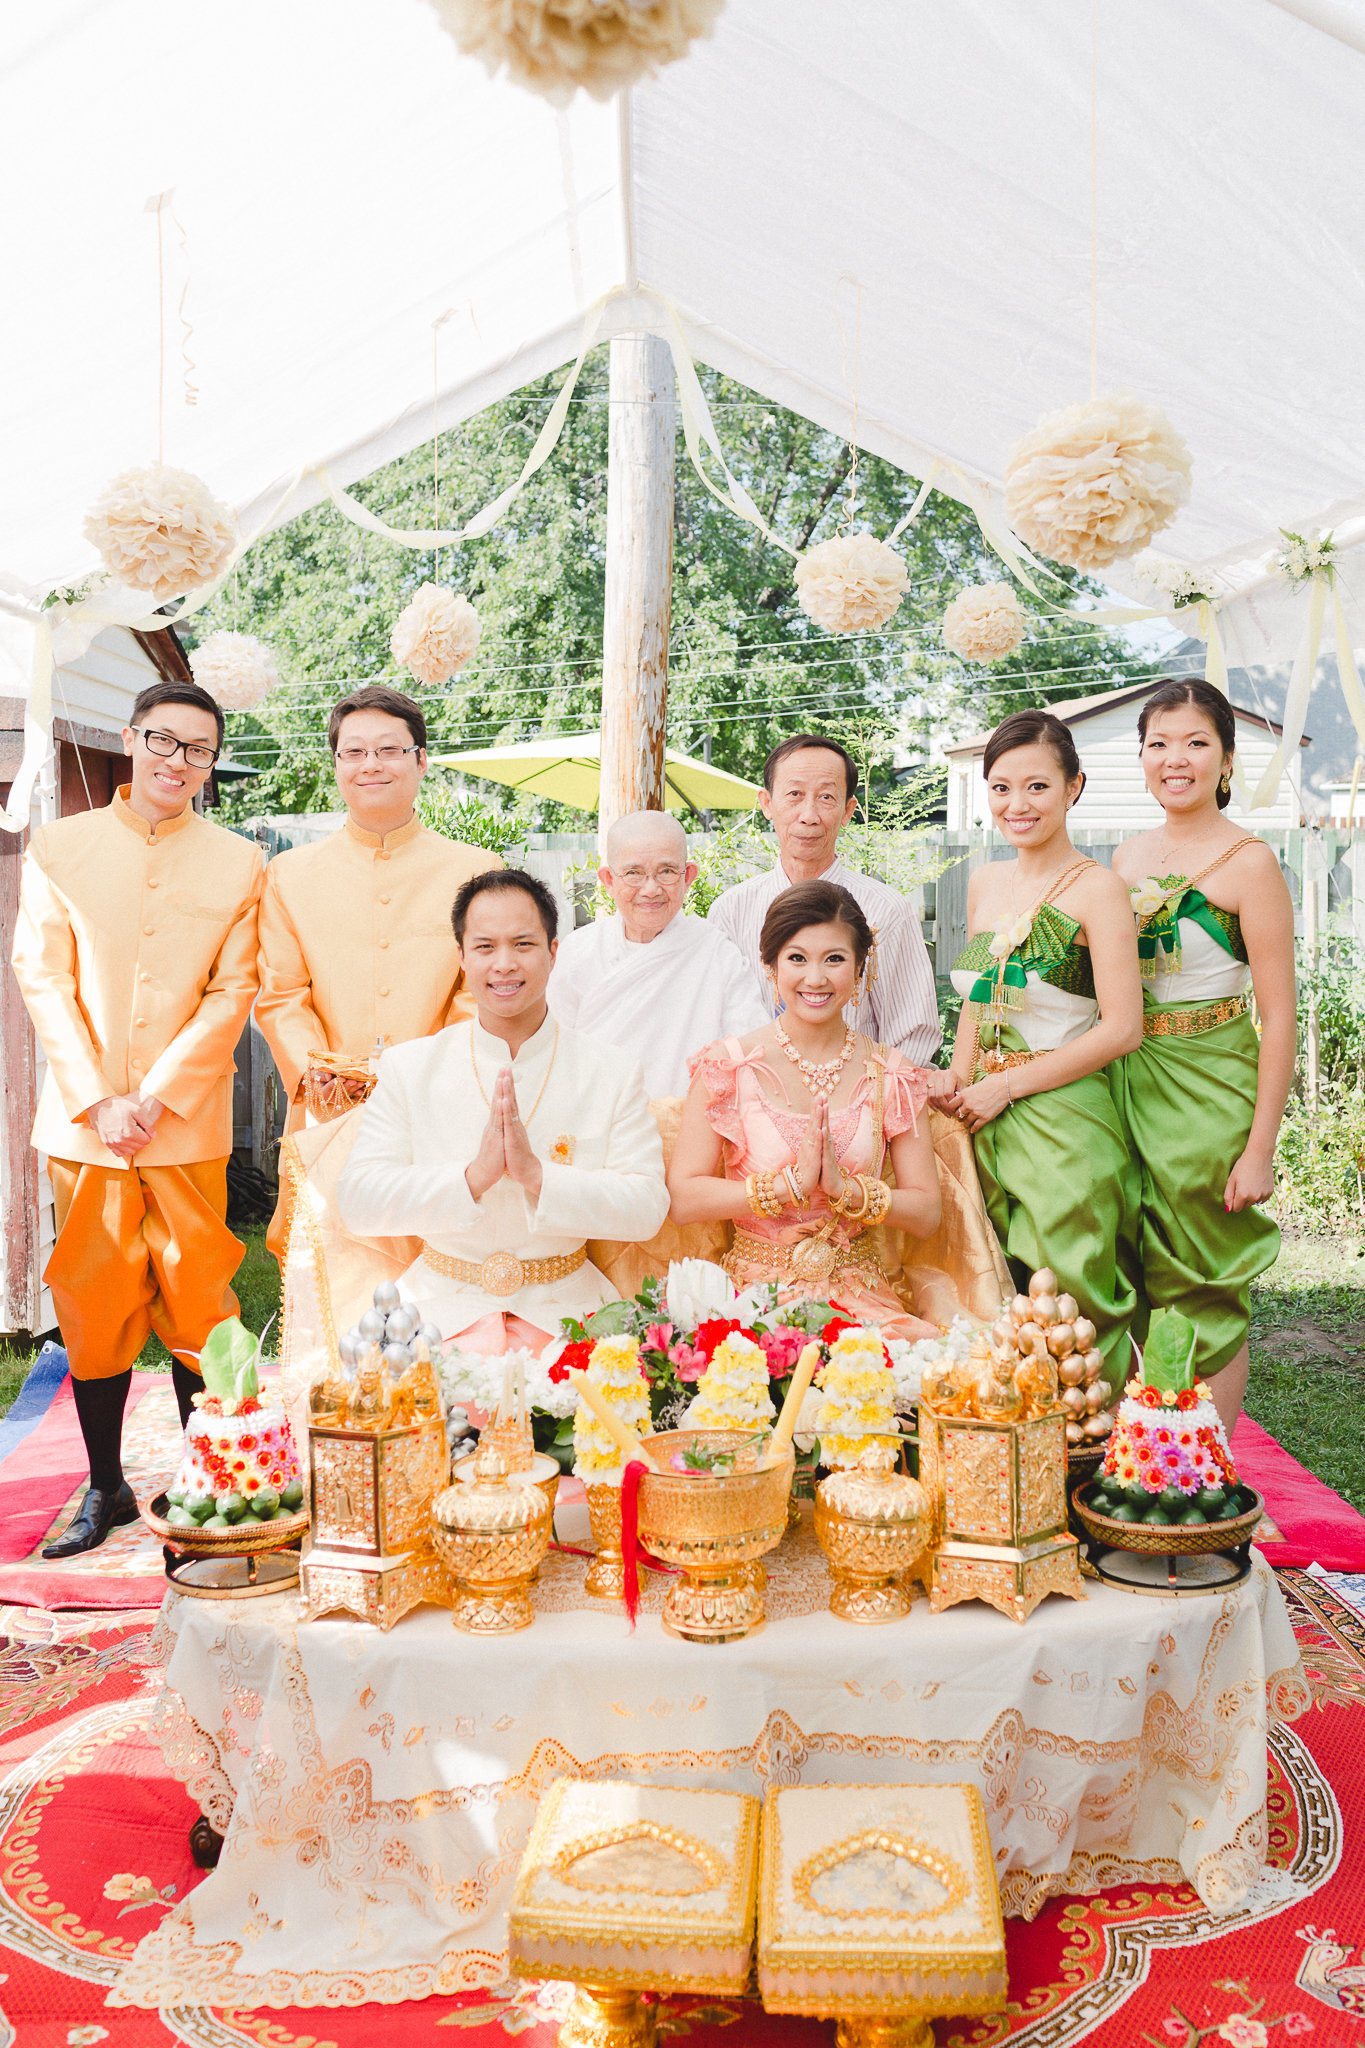 photographe-montreal-mariage-culturel-traditionnel-cambodgien-lisa-renault-photographie-traditional-cultural-cambodian-wedding-42